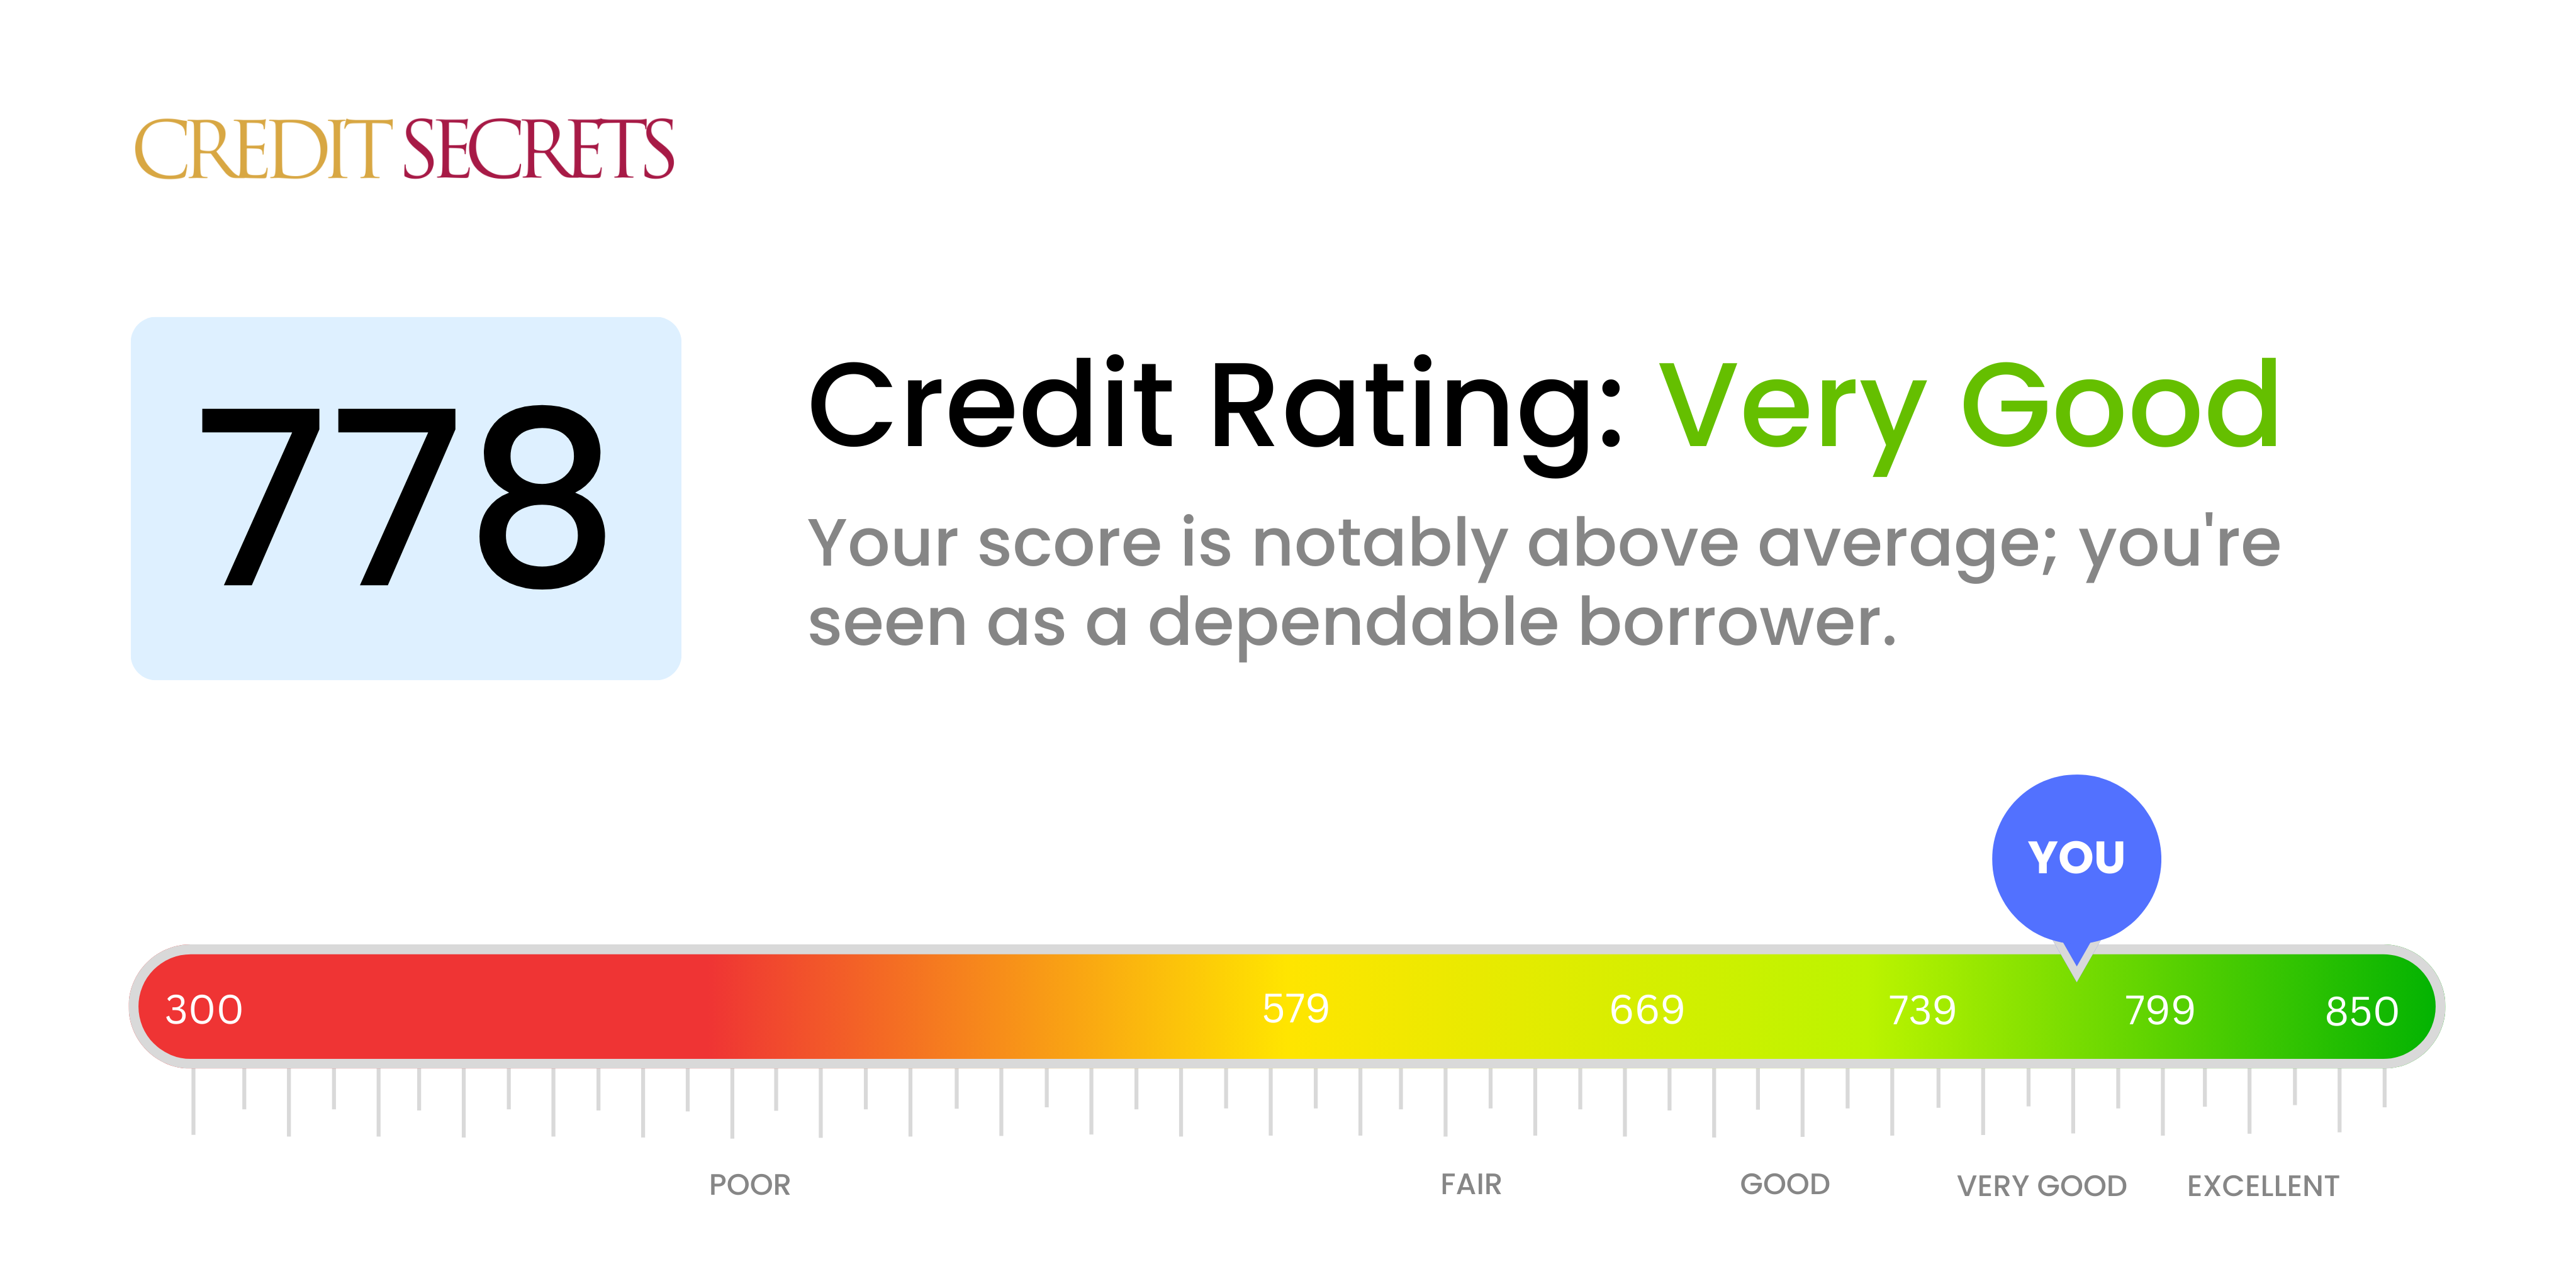 Is 778 a good credit score?